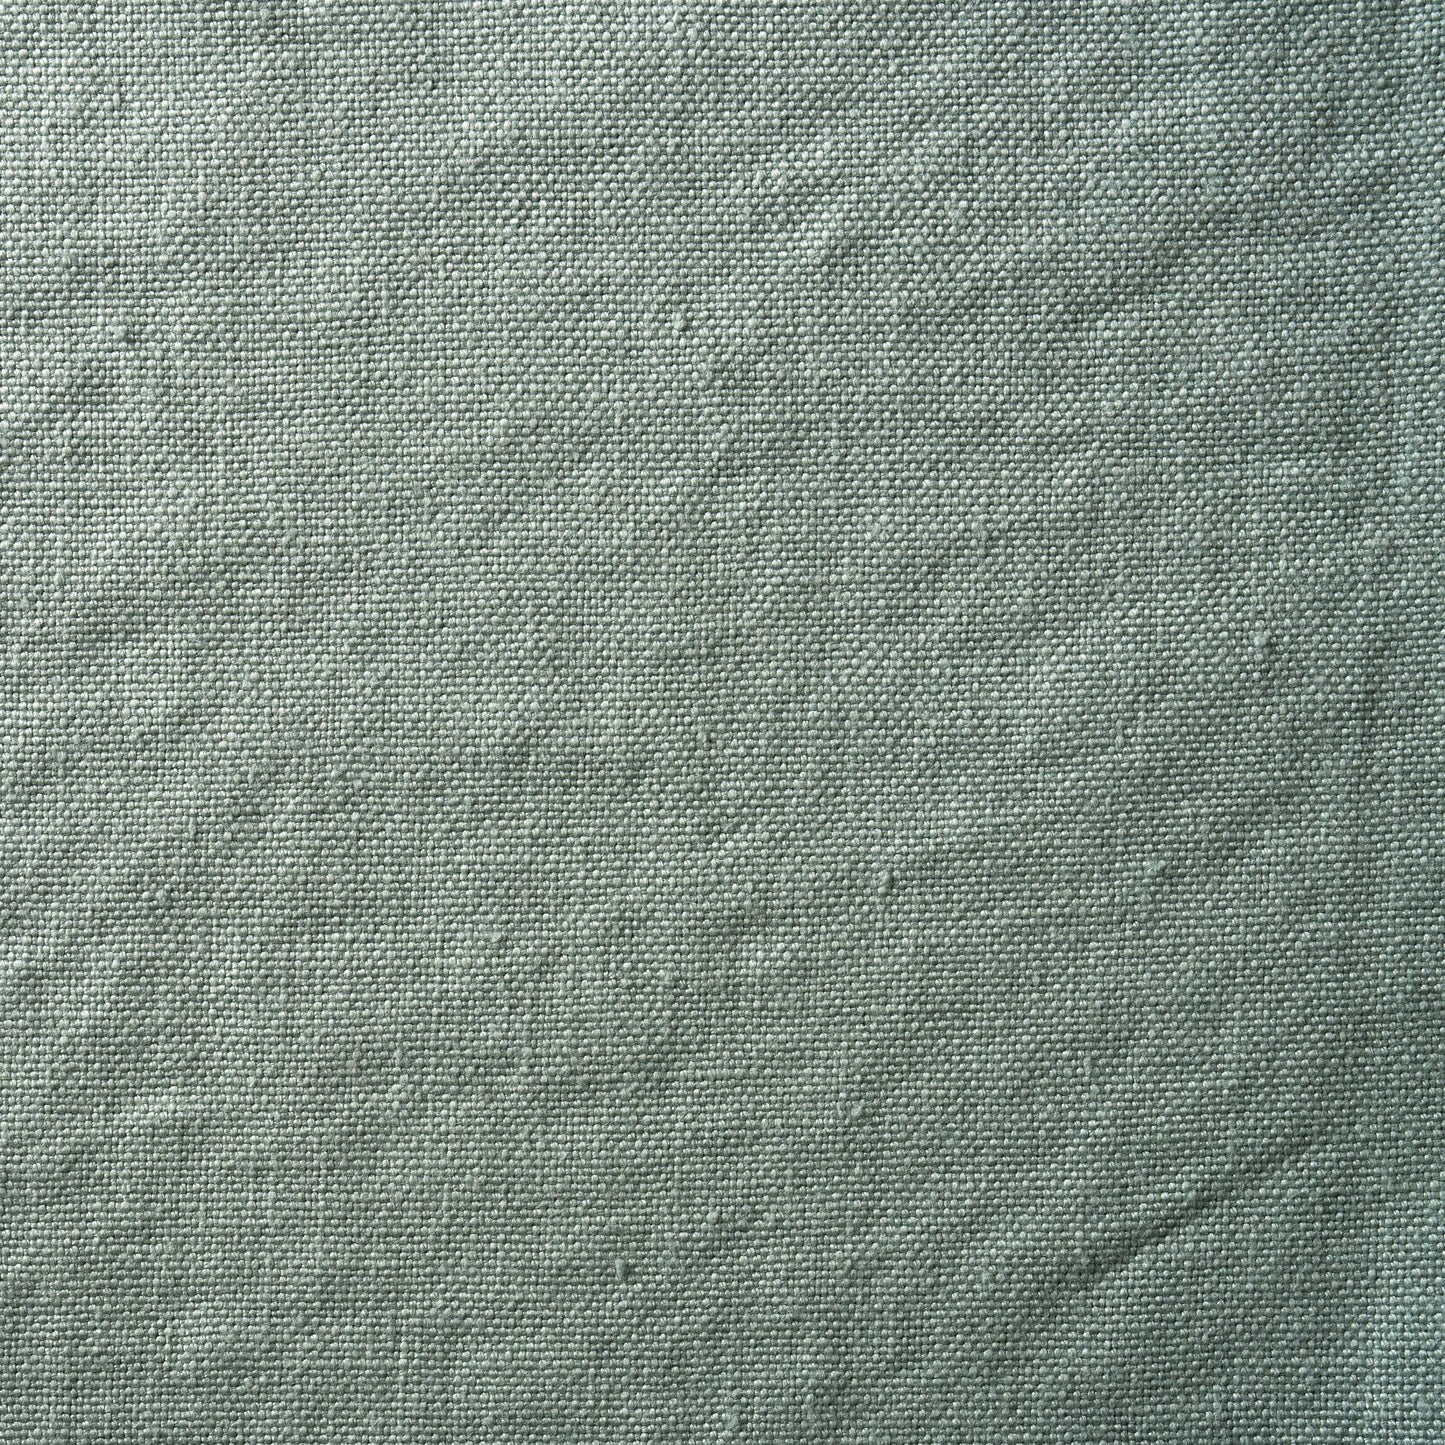 12 oz/sq yard 100% Upholstery/ Slipcover Weight Linen in Surf Crest Swatch